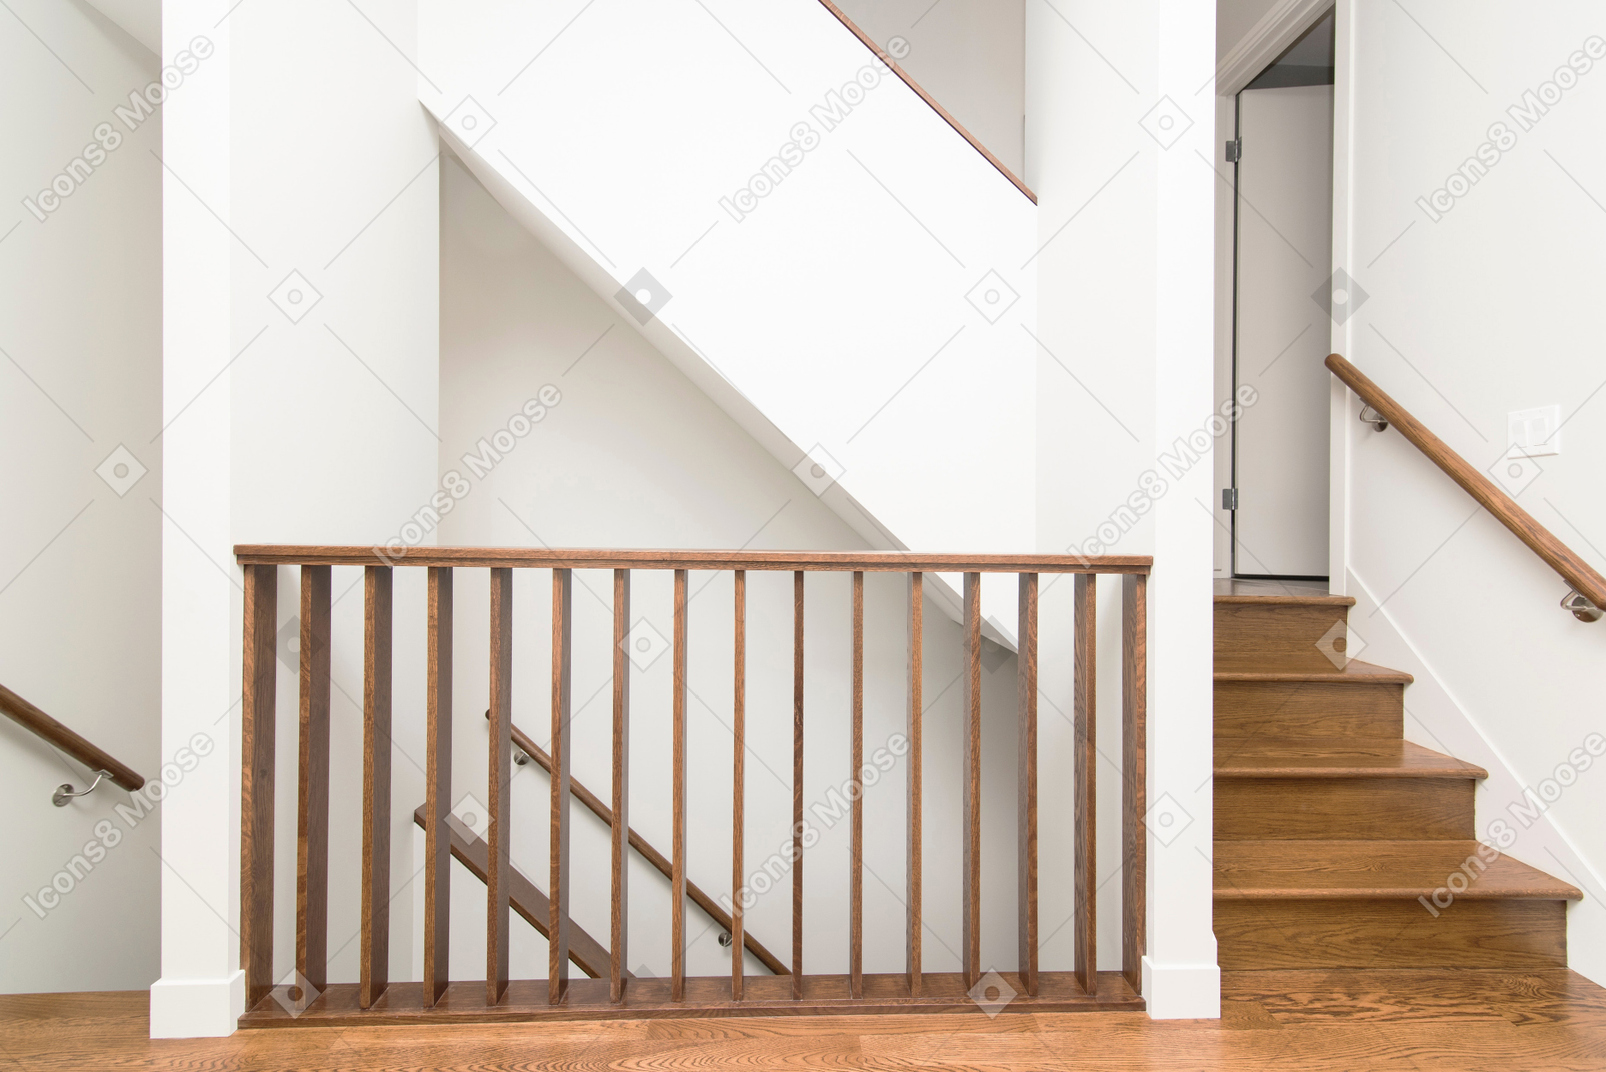 Background of stairs